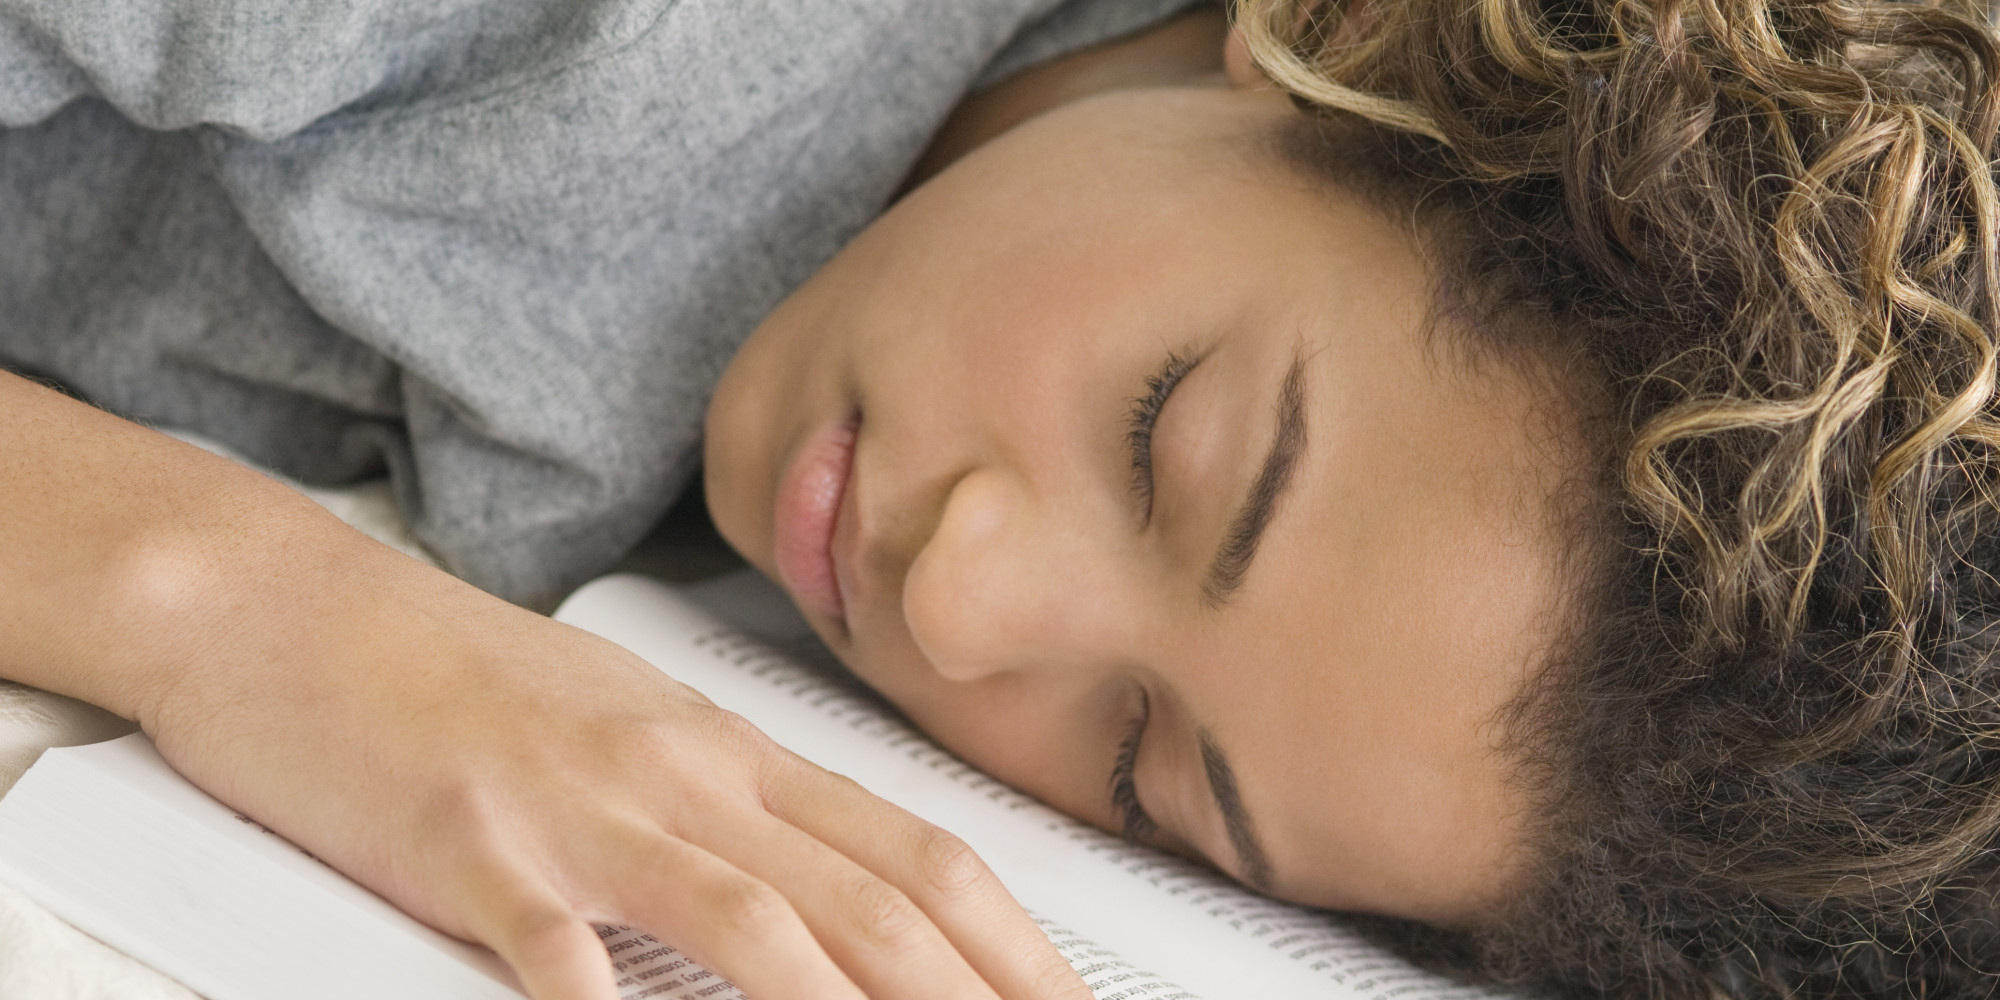 Study reveals that it is possible to learn while you sleep